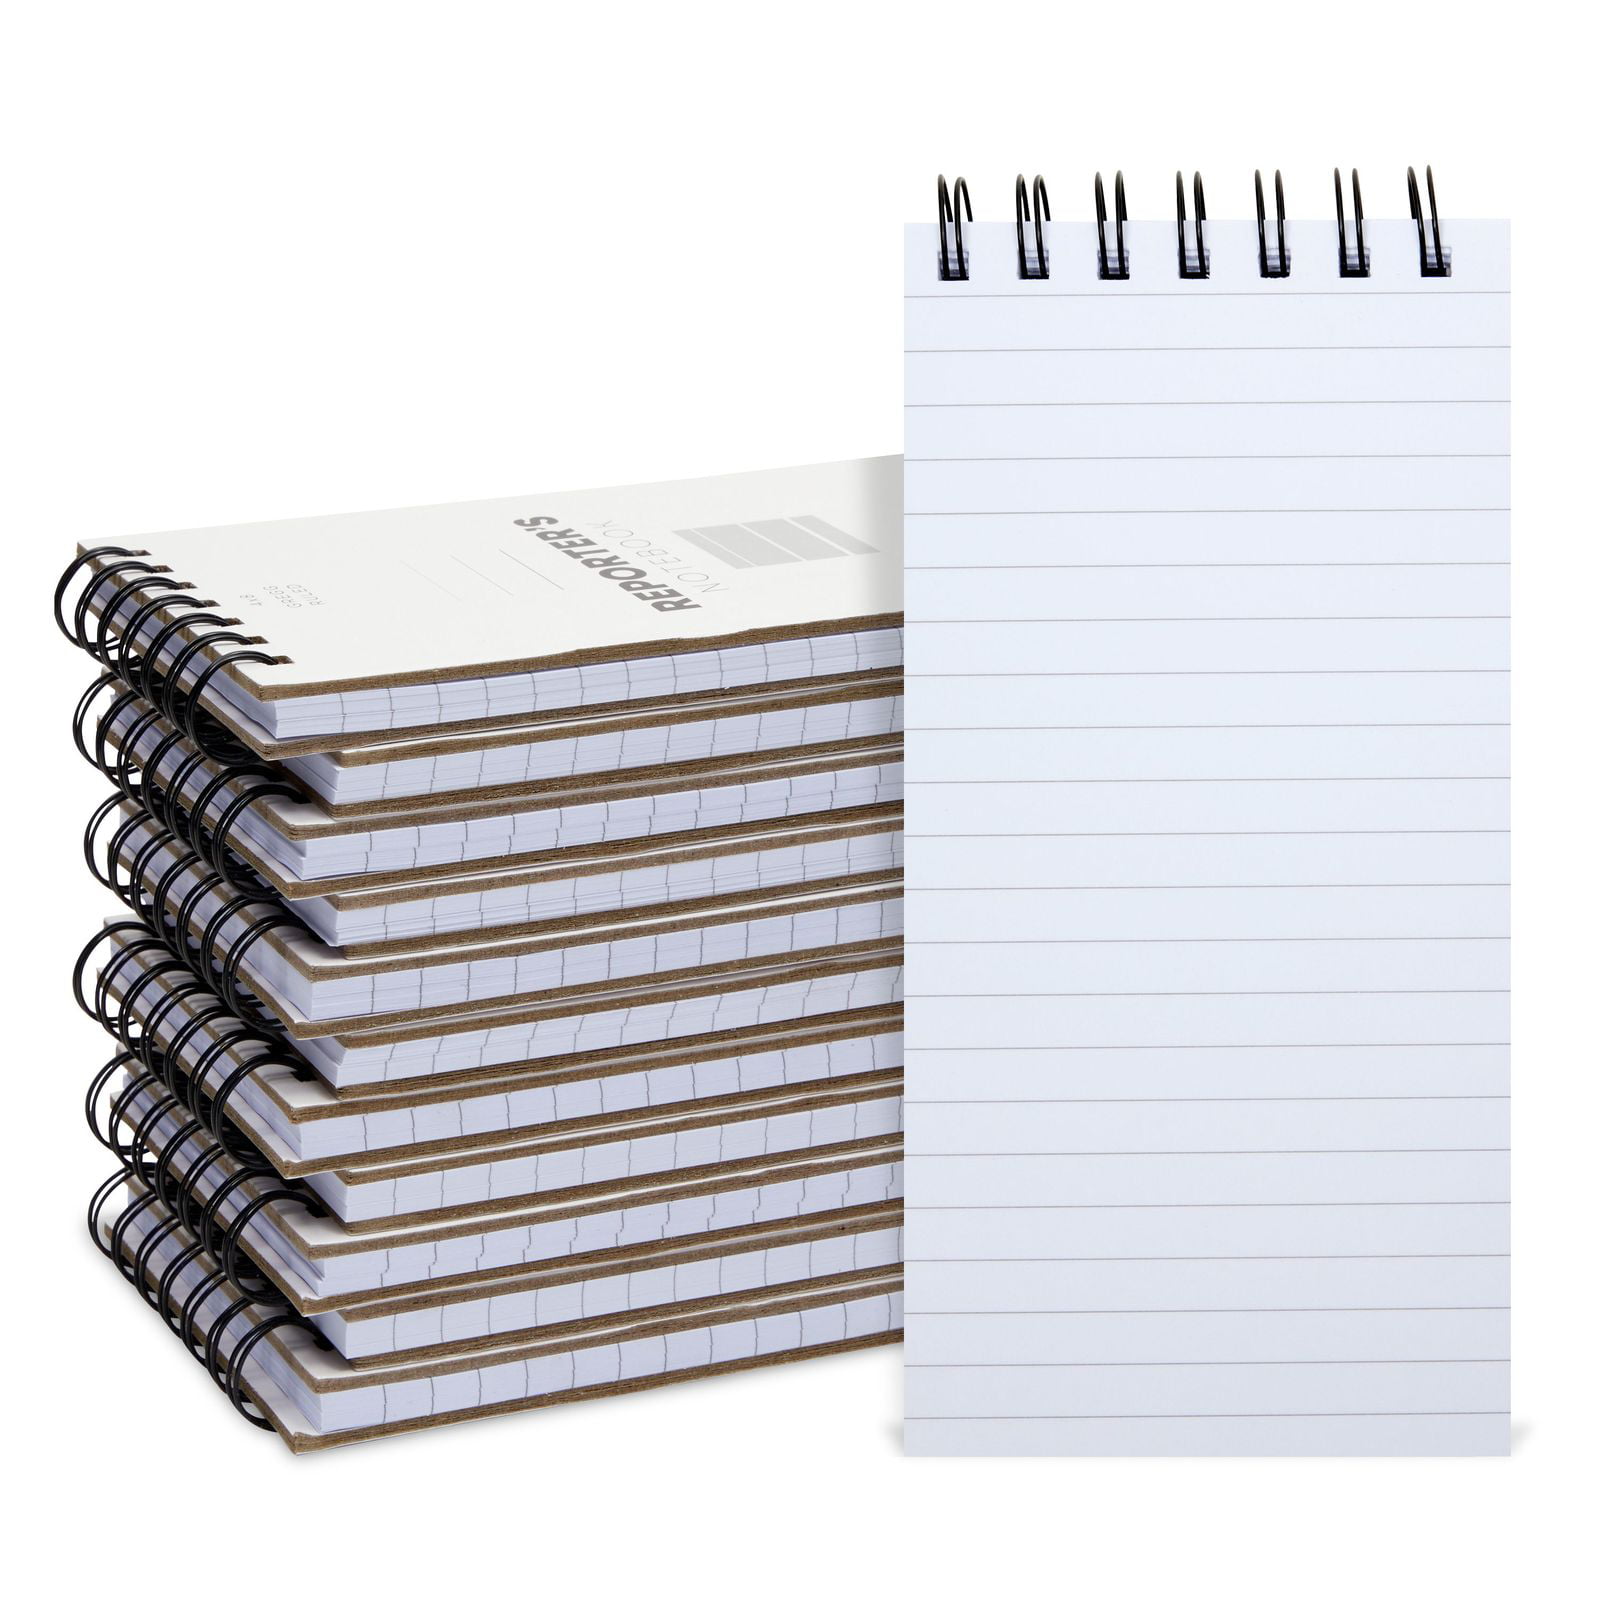 Police Field Interview Notebook 3.75 X 6 Pocket Sized Spiral For Public Safety 